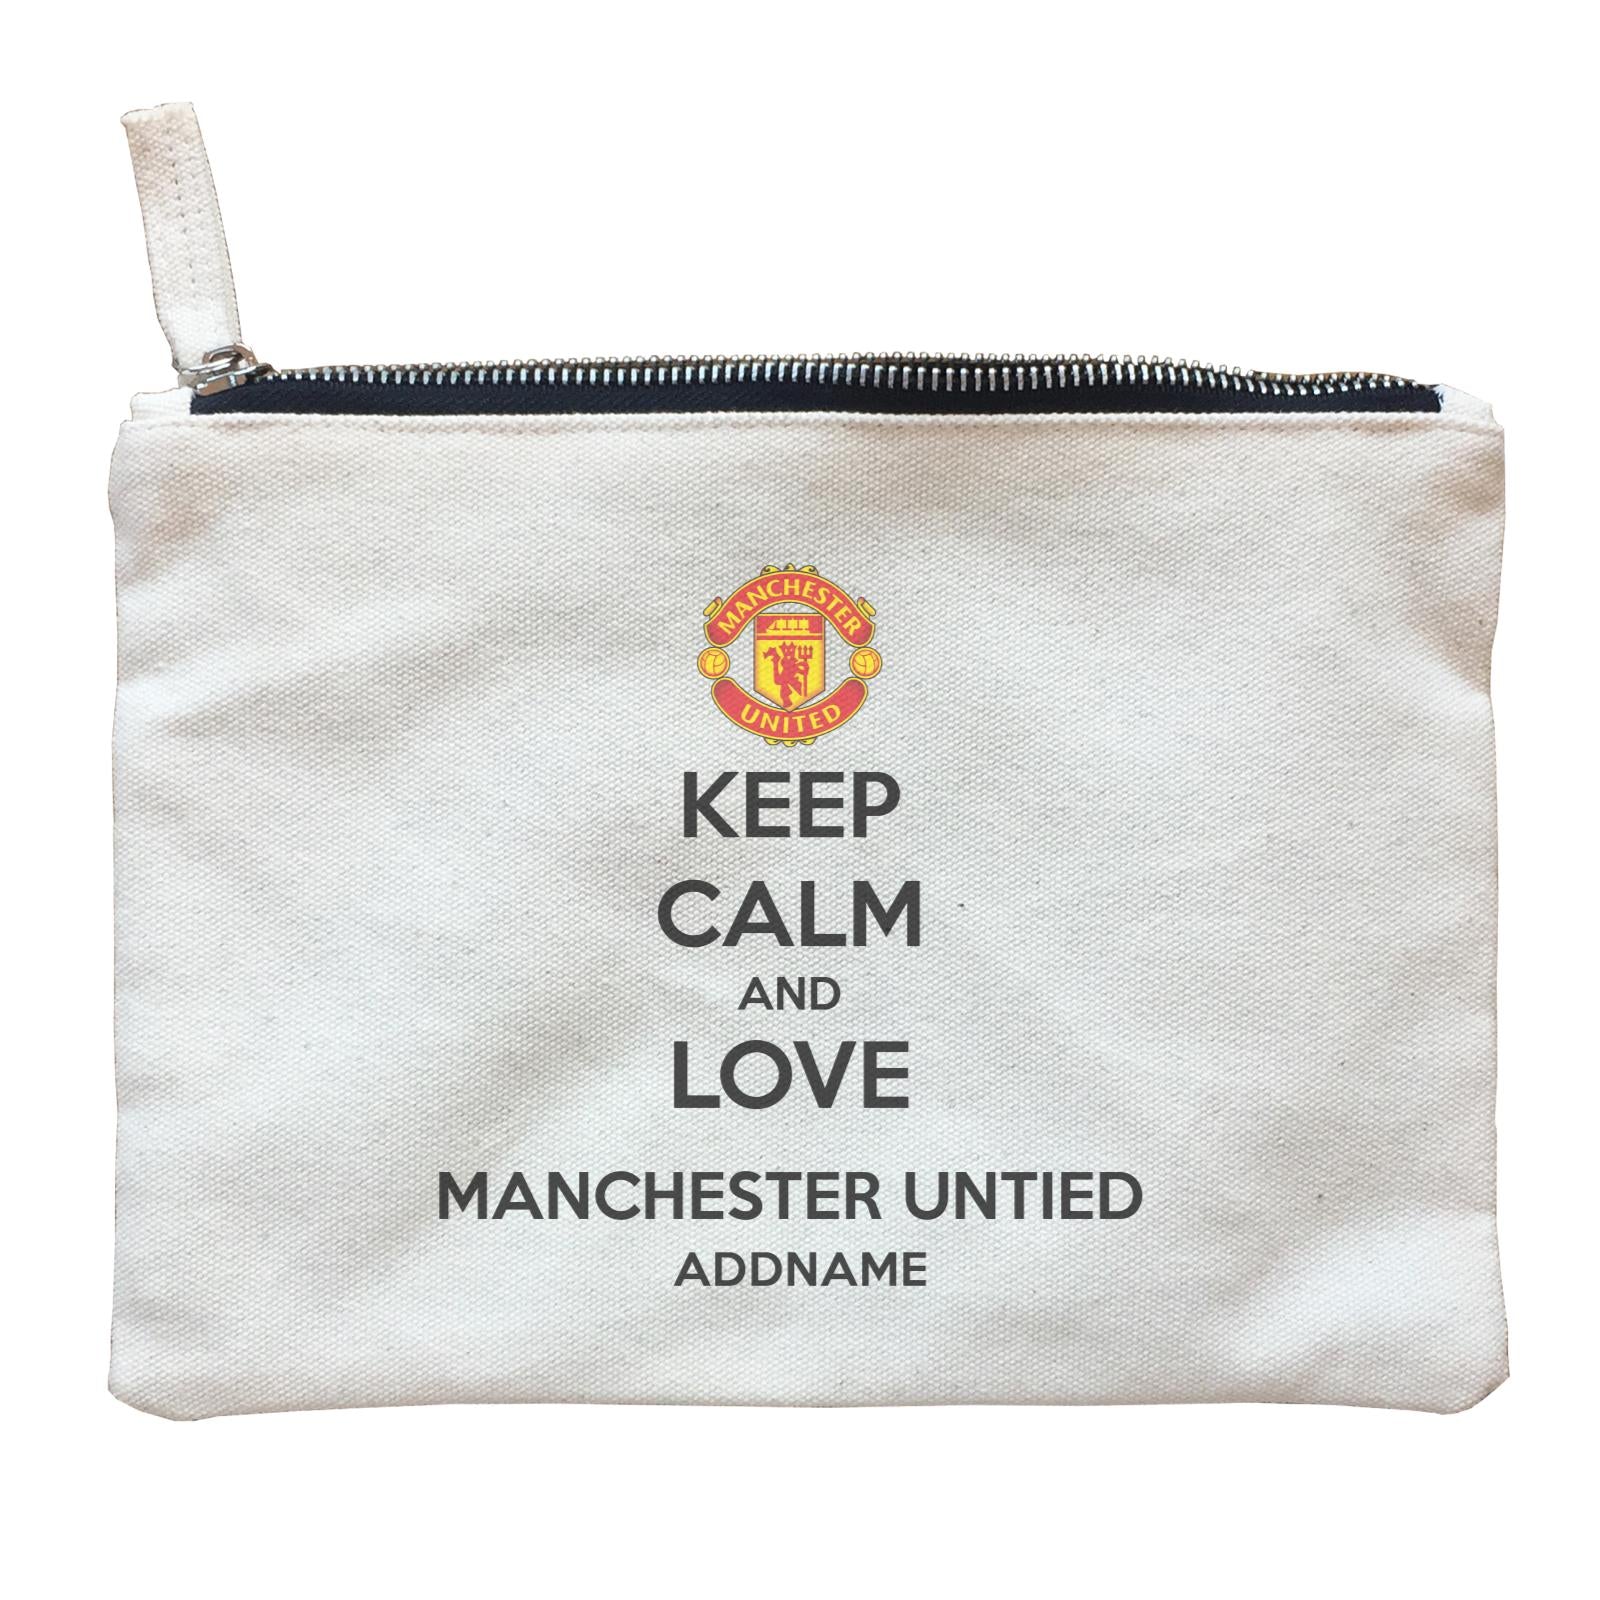 Manchester United Football Keep Calm And Love Series Addname Zipper Pouch